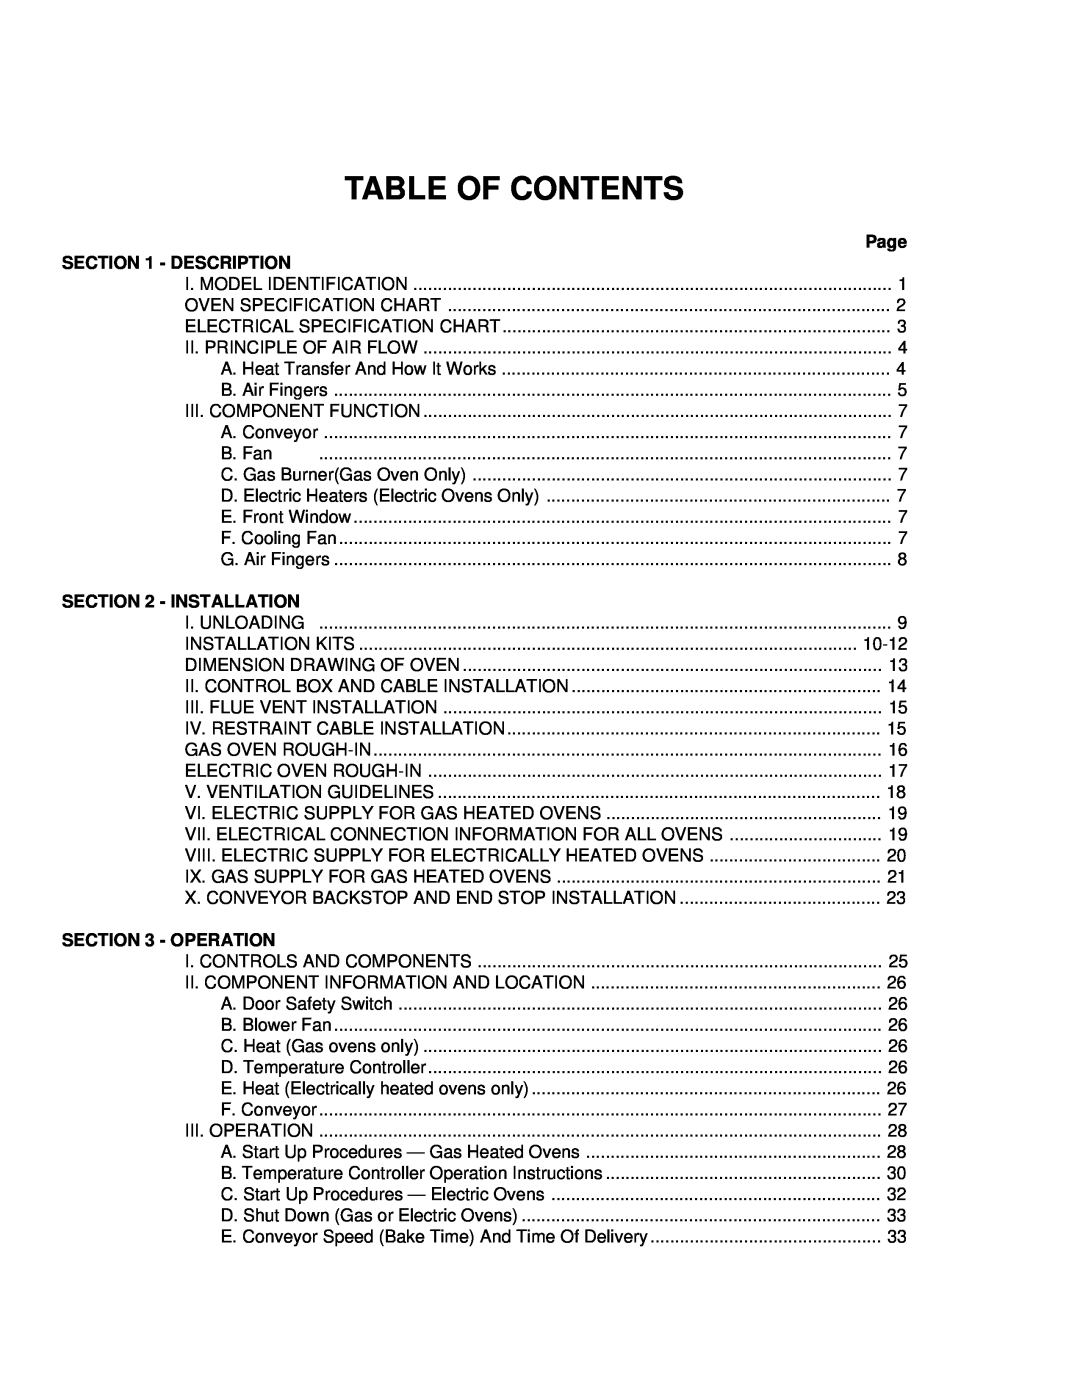 Middleby Marshall PS200-R68 installation manual Table Of Contents, Page, Description, Installation, Operation 